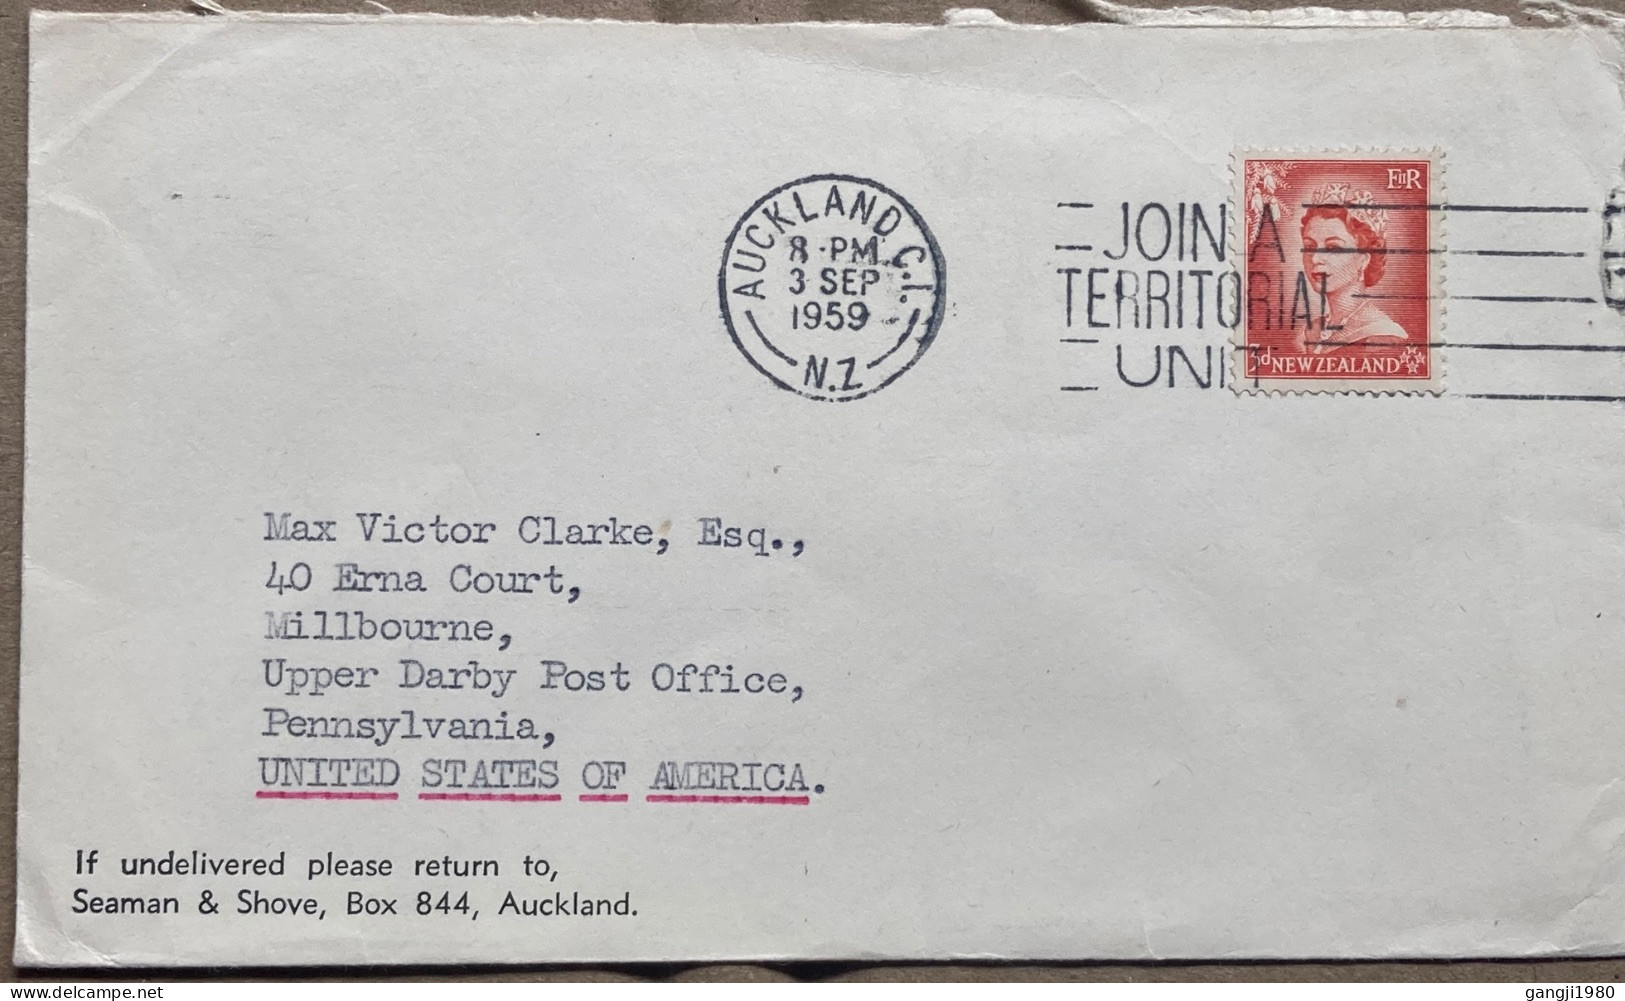 NEW ZEALAND 1959, COVER USED TO USA, FIRM SEAMAN & SHOVE, AUCKLAND CITY SLOGAN CANCEL, JOIN A TERRITORIAL UNIT, QUEEN ST - Lettres & Documents